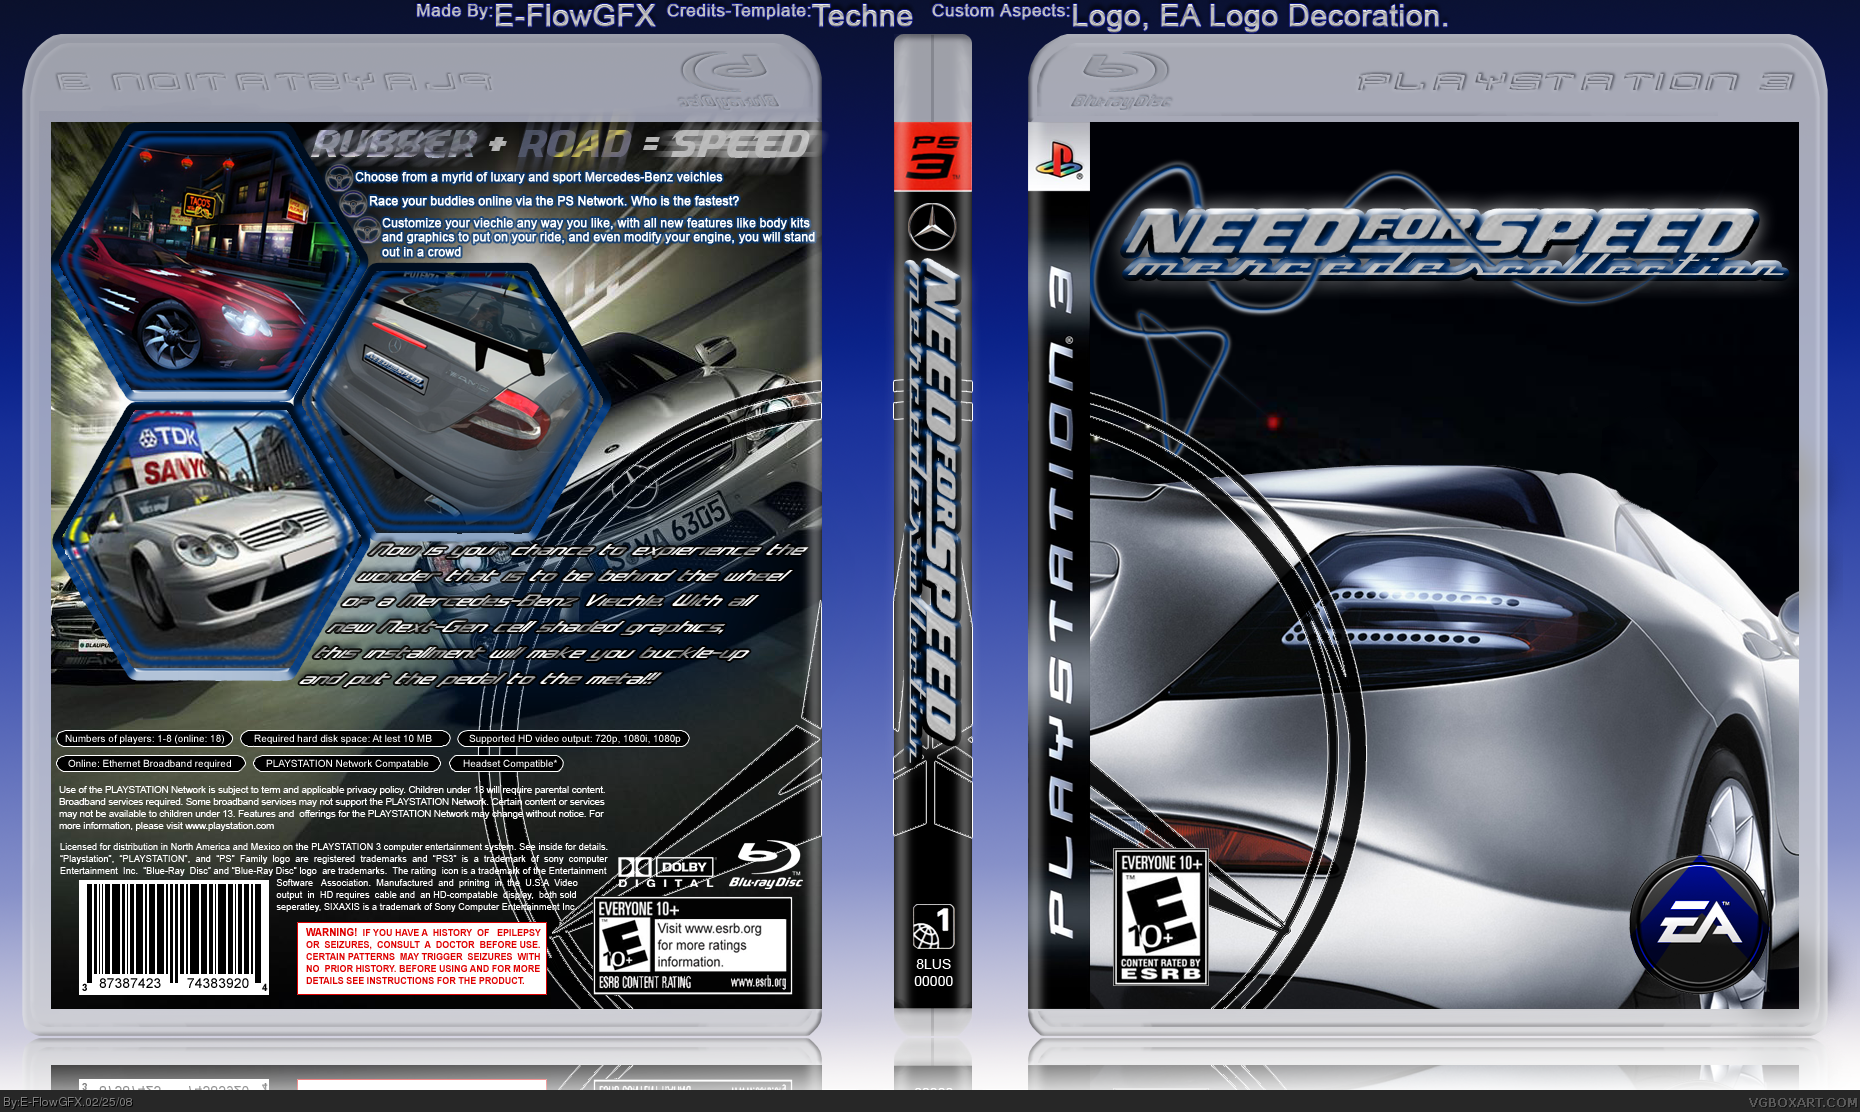 Need For Speed: Mercedes Collection box cover